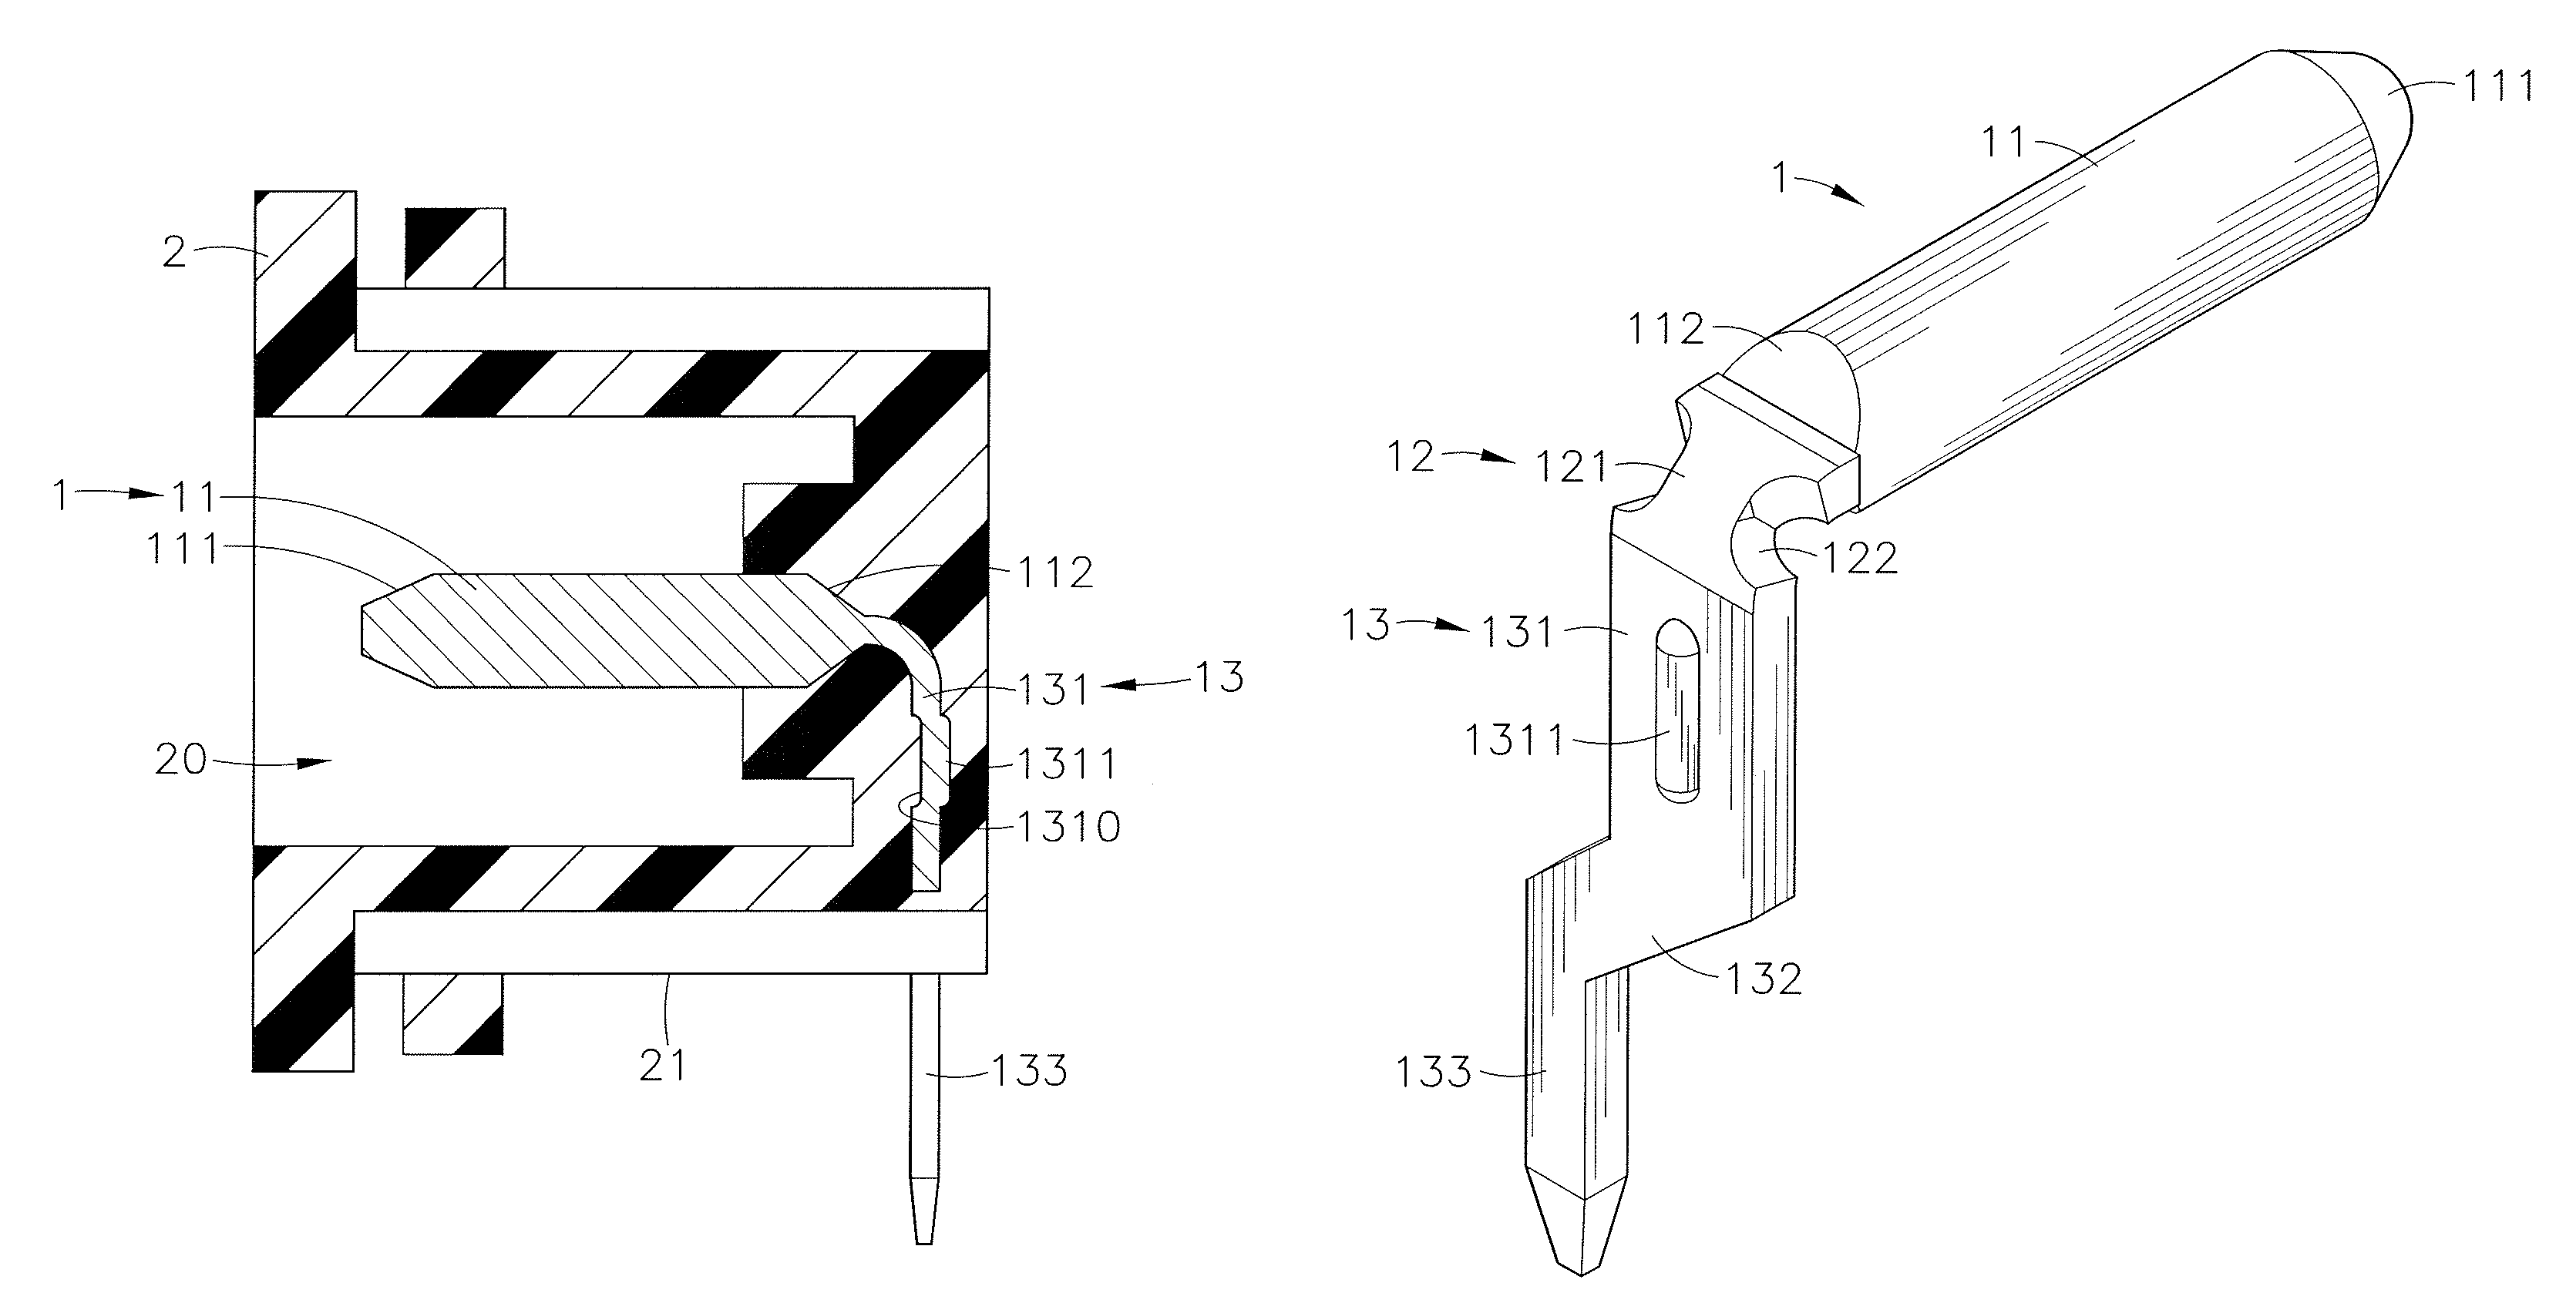 Electric connector having terminals with outwardly extending extension arms